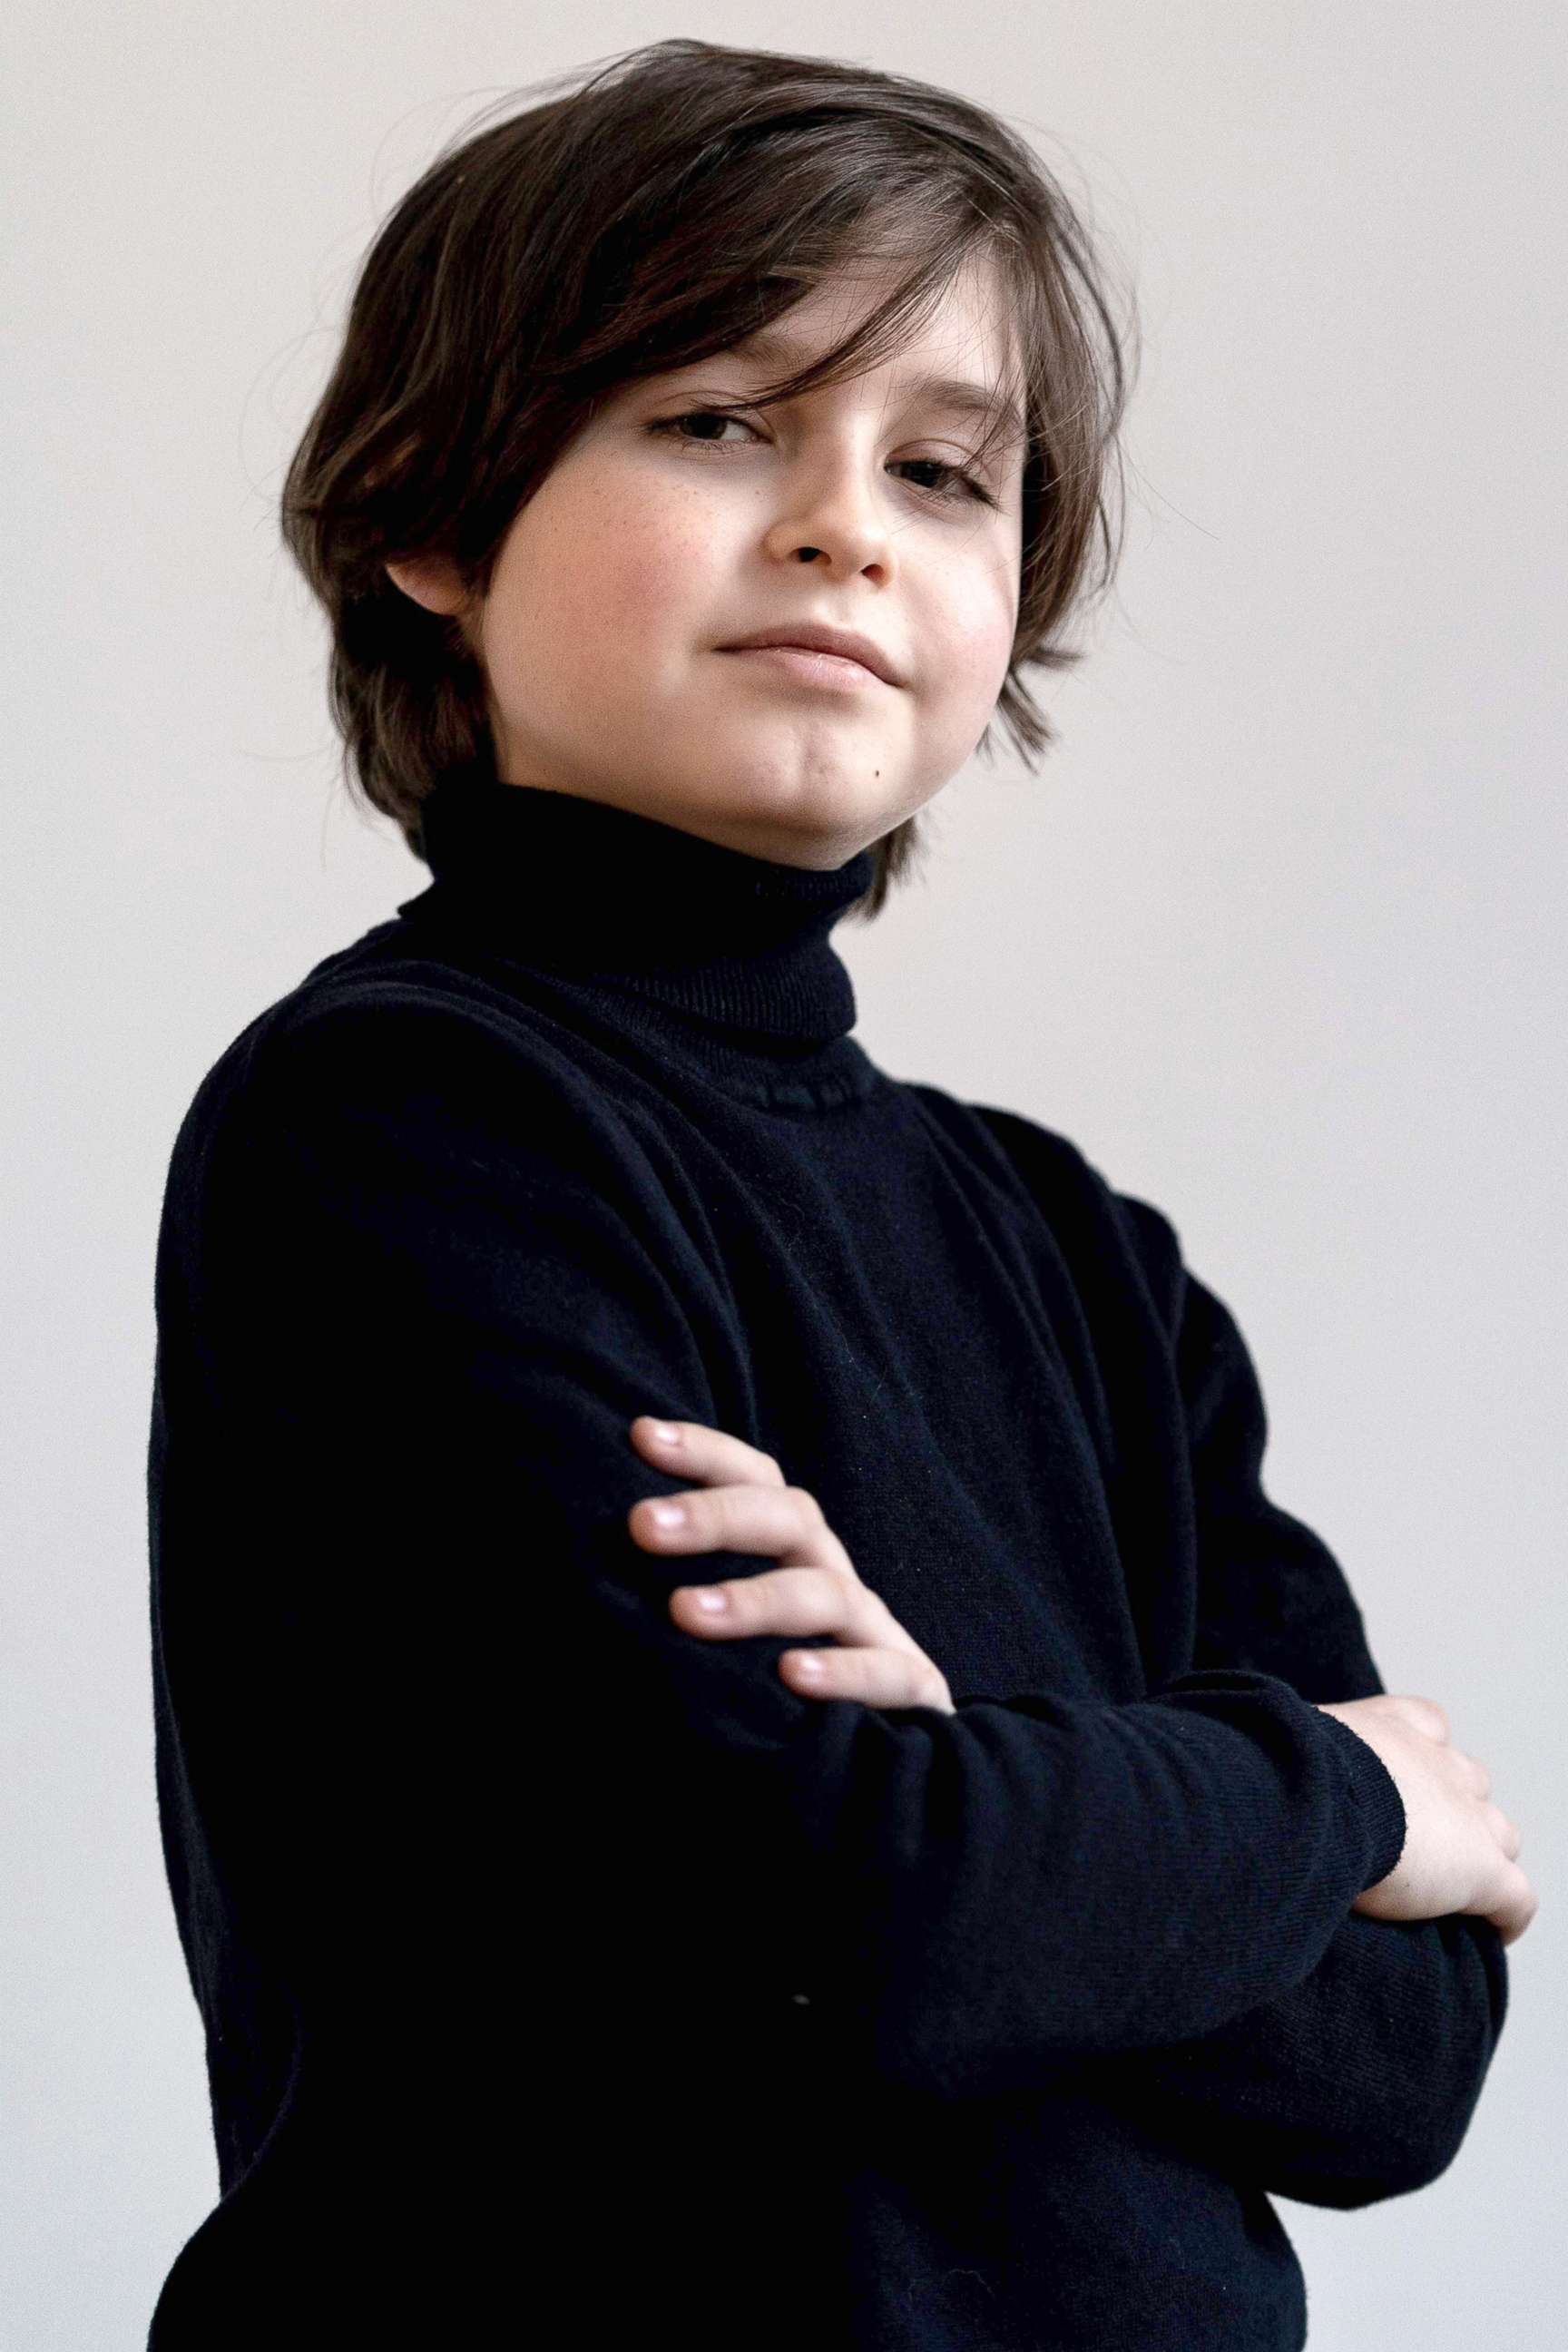 PHOTO: Belgian student Laurent Simons, 9, poses during a photo session at his home, Nov. 21, 2019, in Amsterdam. 